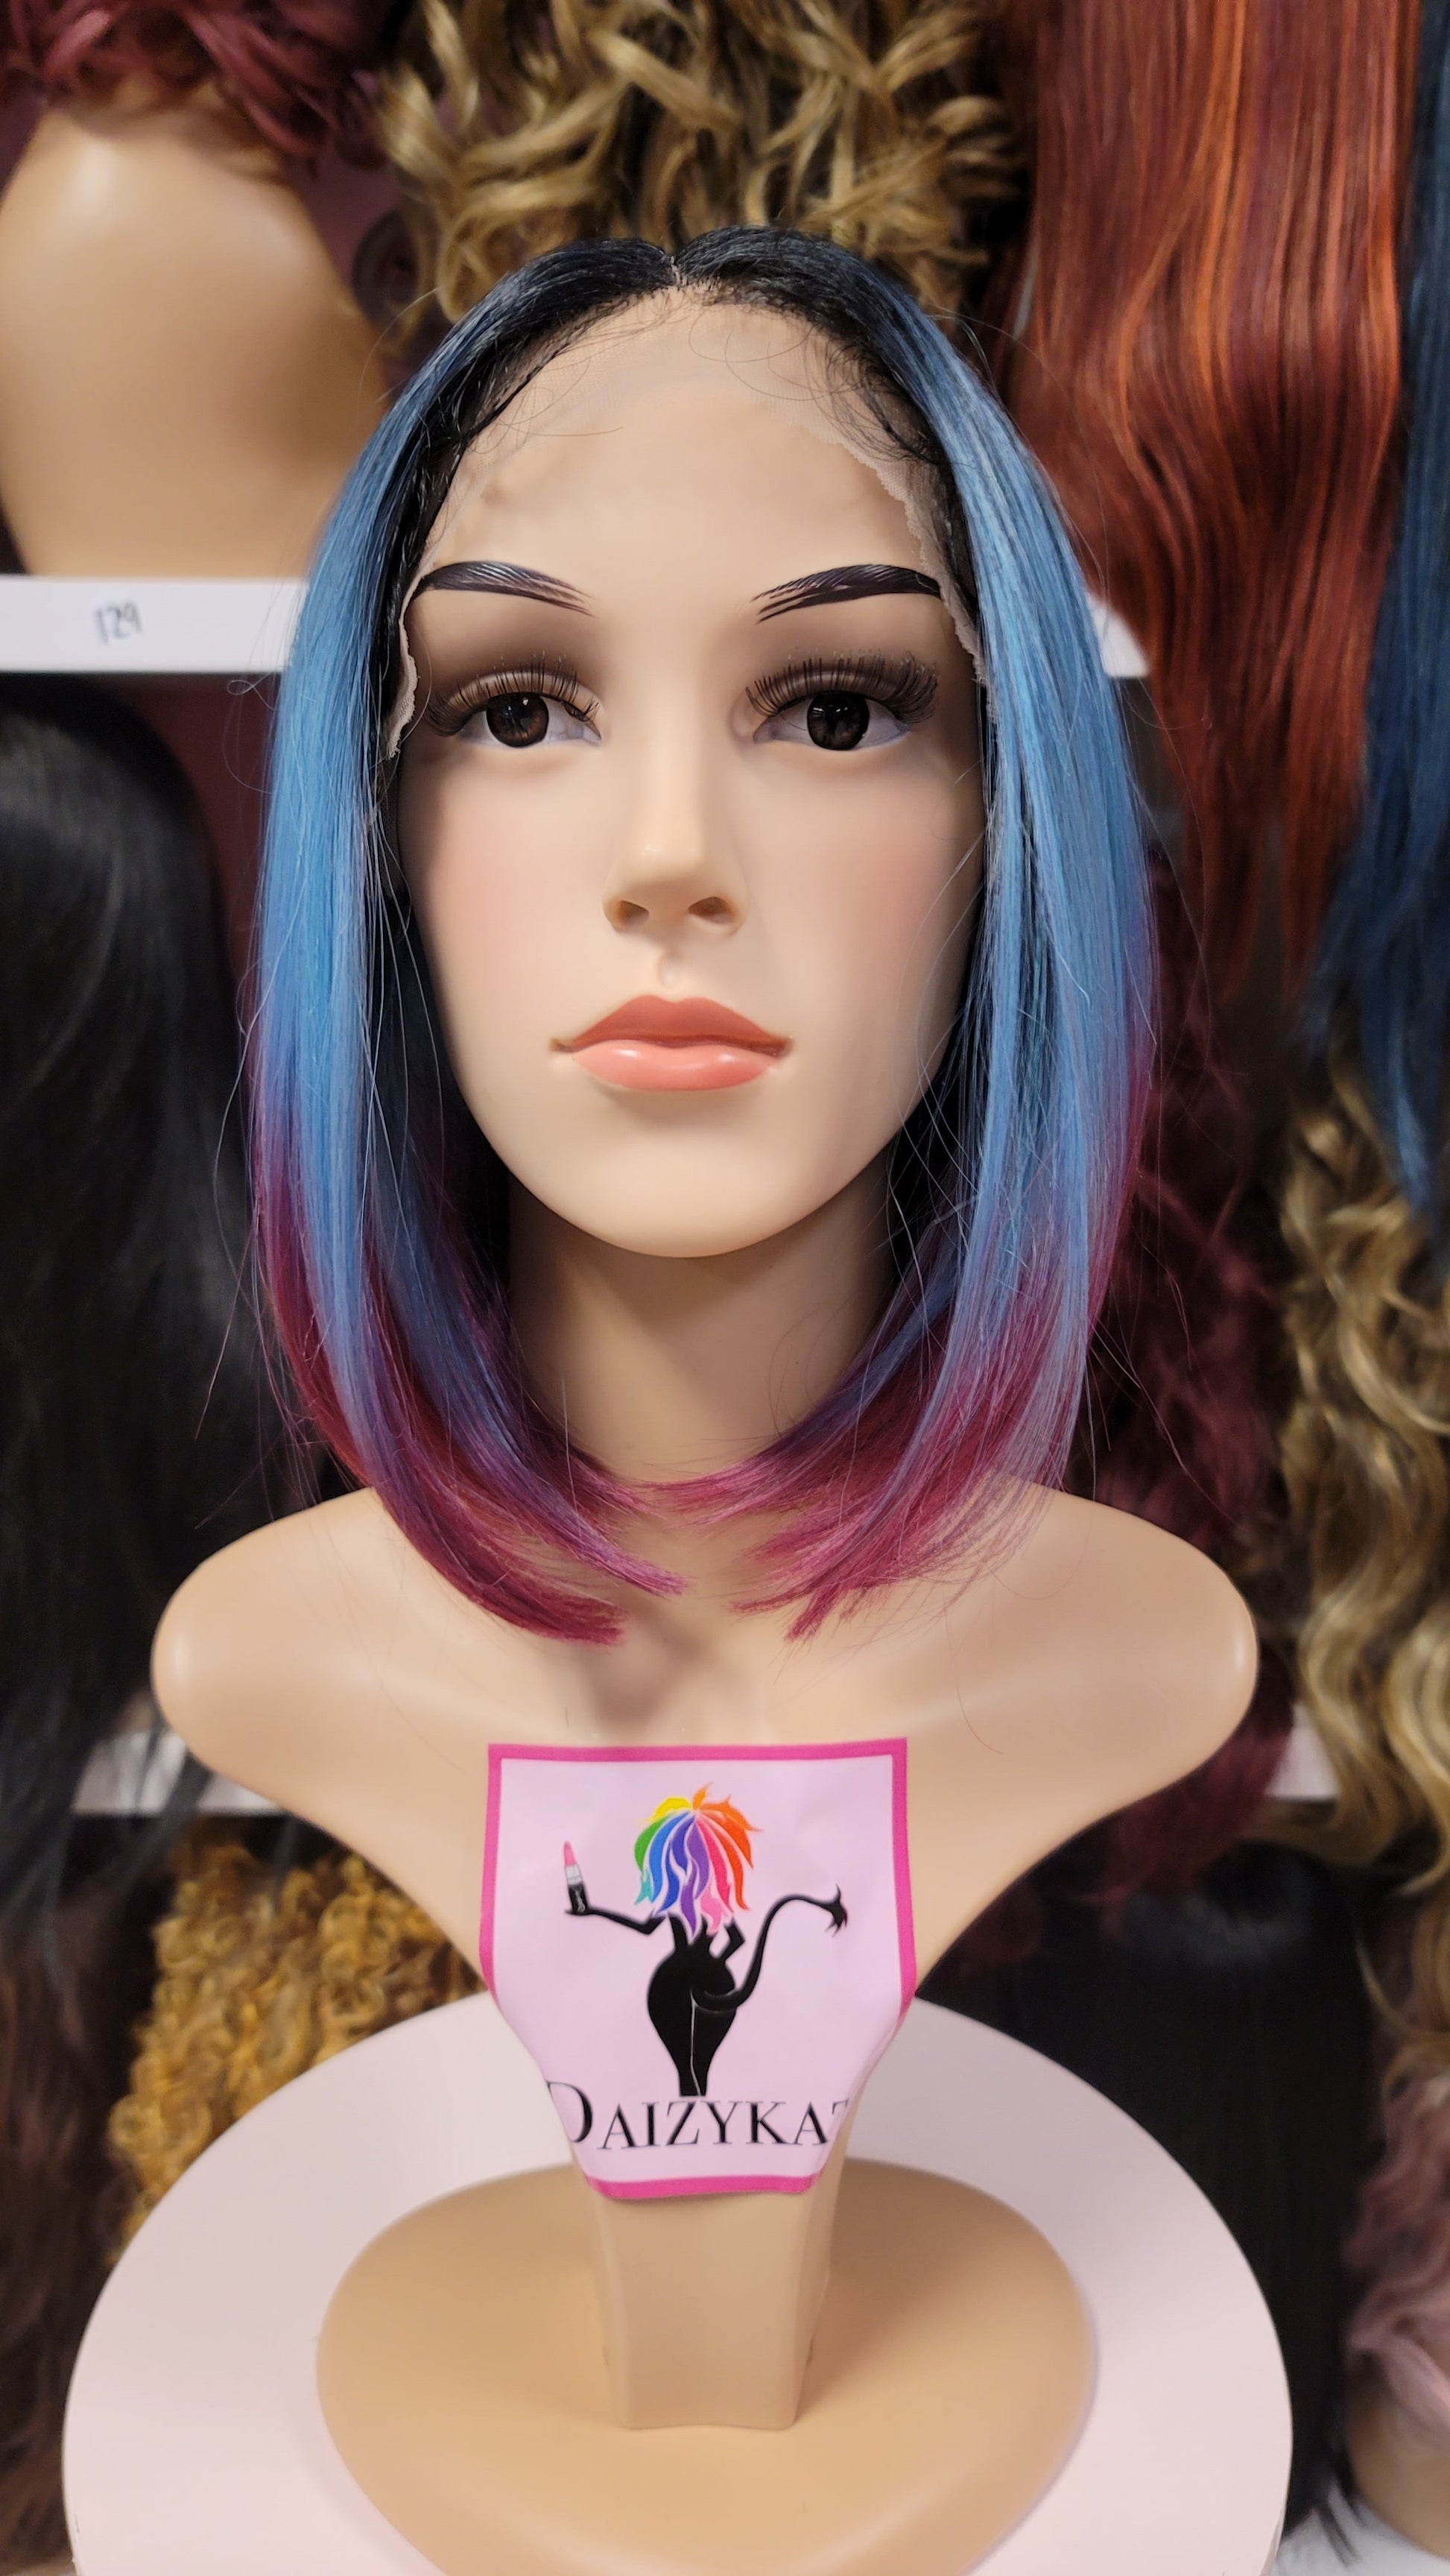 466 CHA CHA - Middle Part Lace Front Wig - BLU.PURP - DaizyKat Cosmetics 466 CHA CHA - Middle Part Lace Front Wig - BLU.PURP DaizyKat Cosmetics Wigs